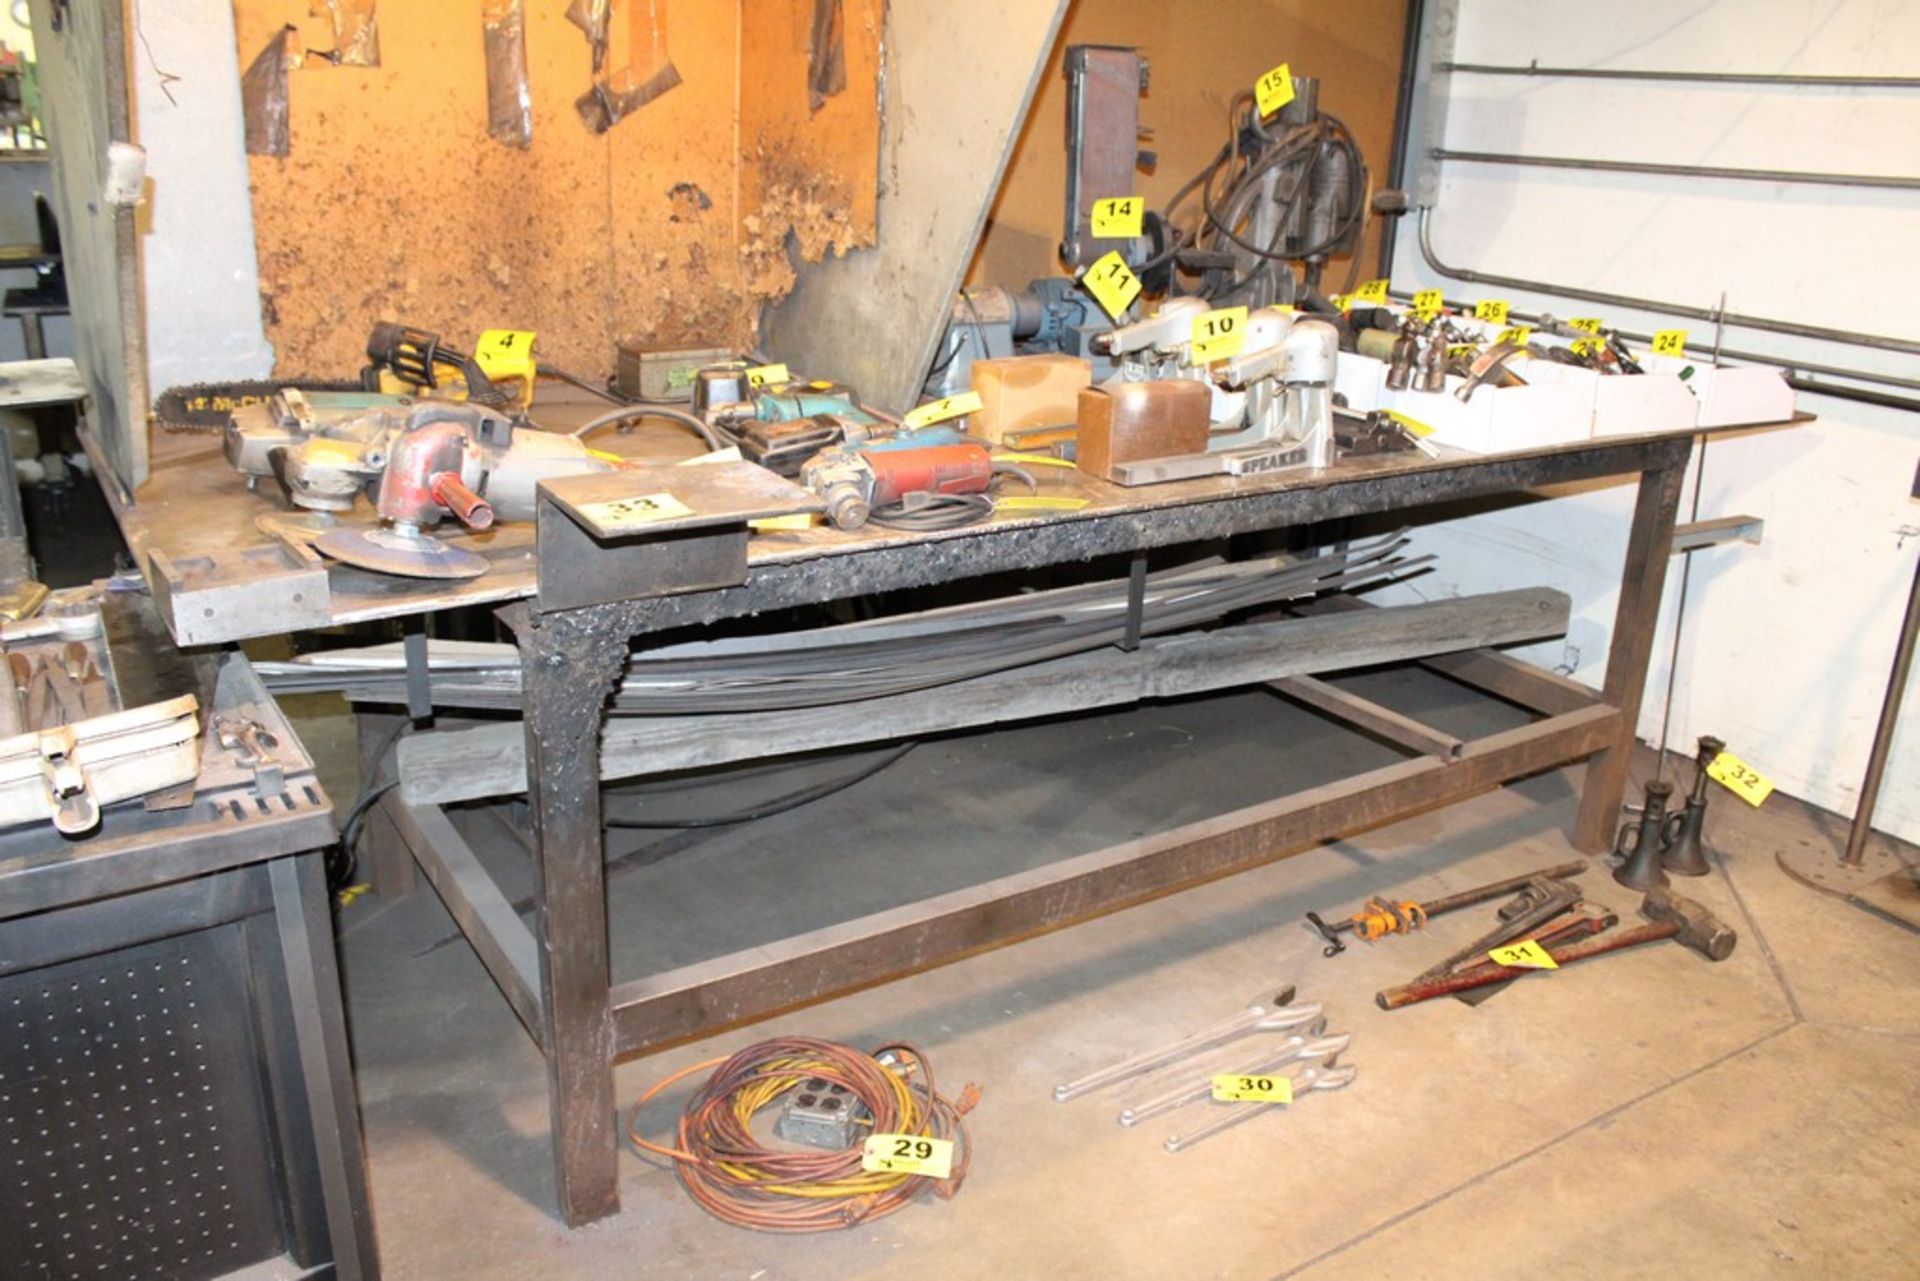 48"X120"X1/2" STEEL WELDING TABLE WITH HOOD AND SMOKEATER EXHAUST SYSTEM - Image 2 of 5